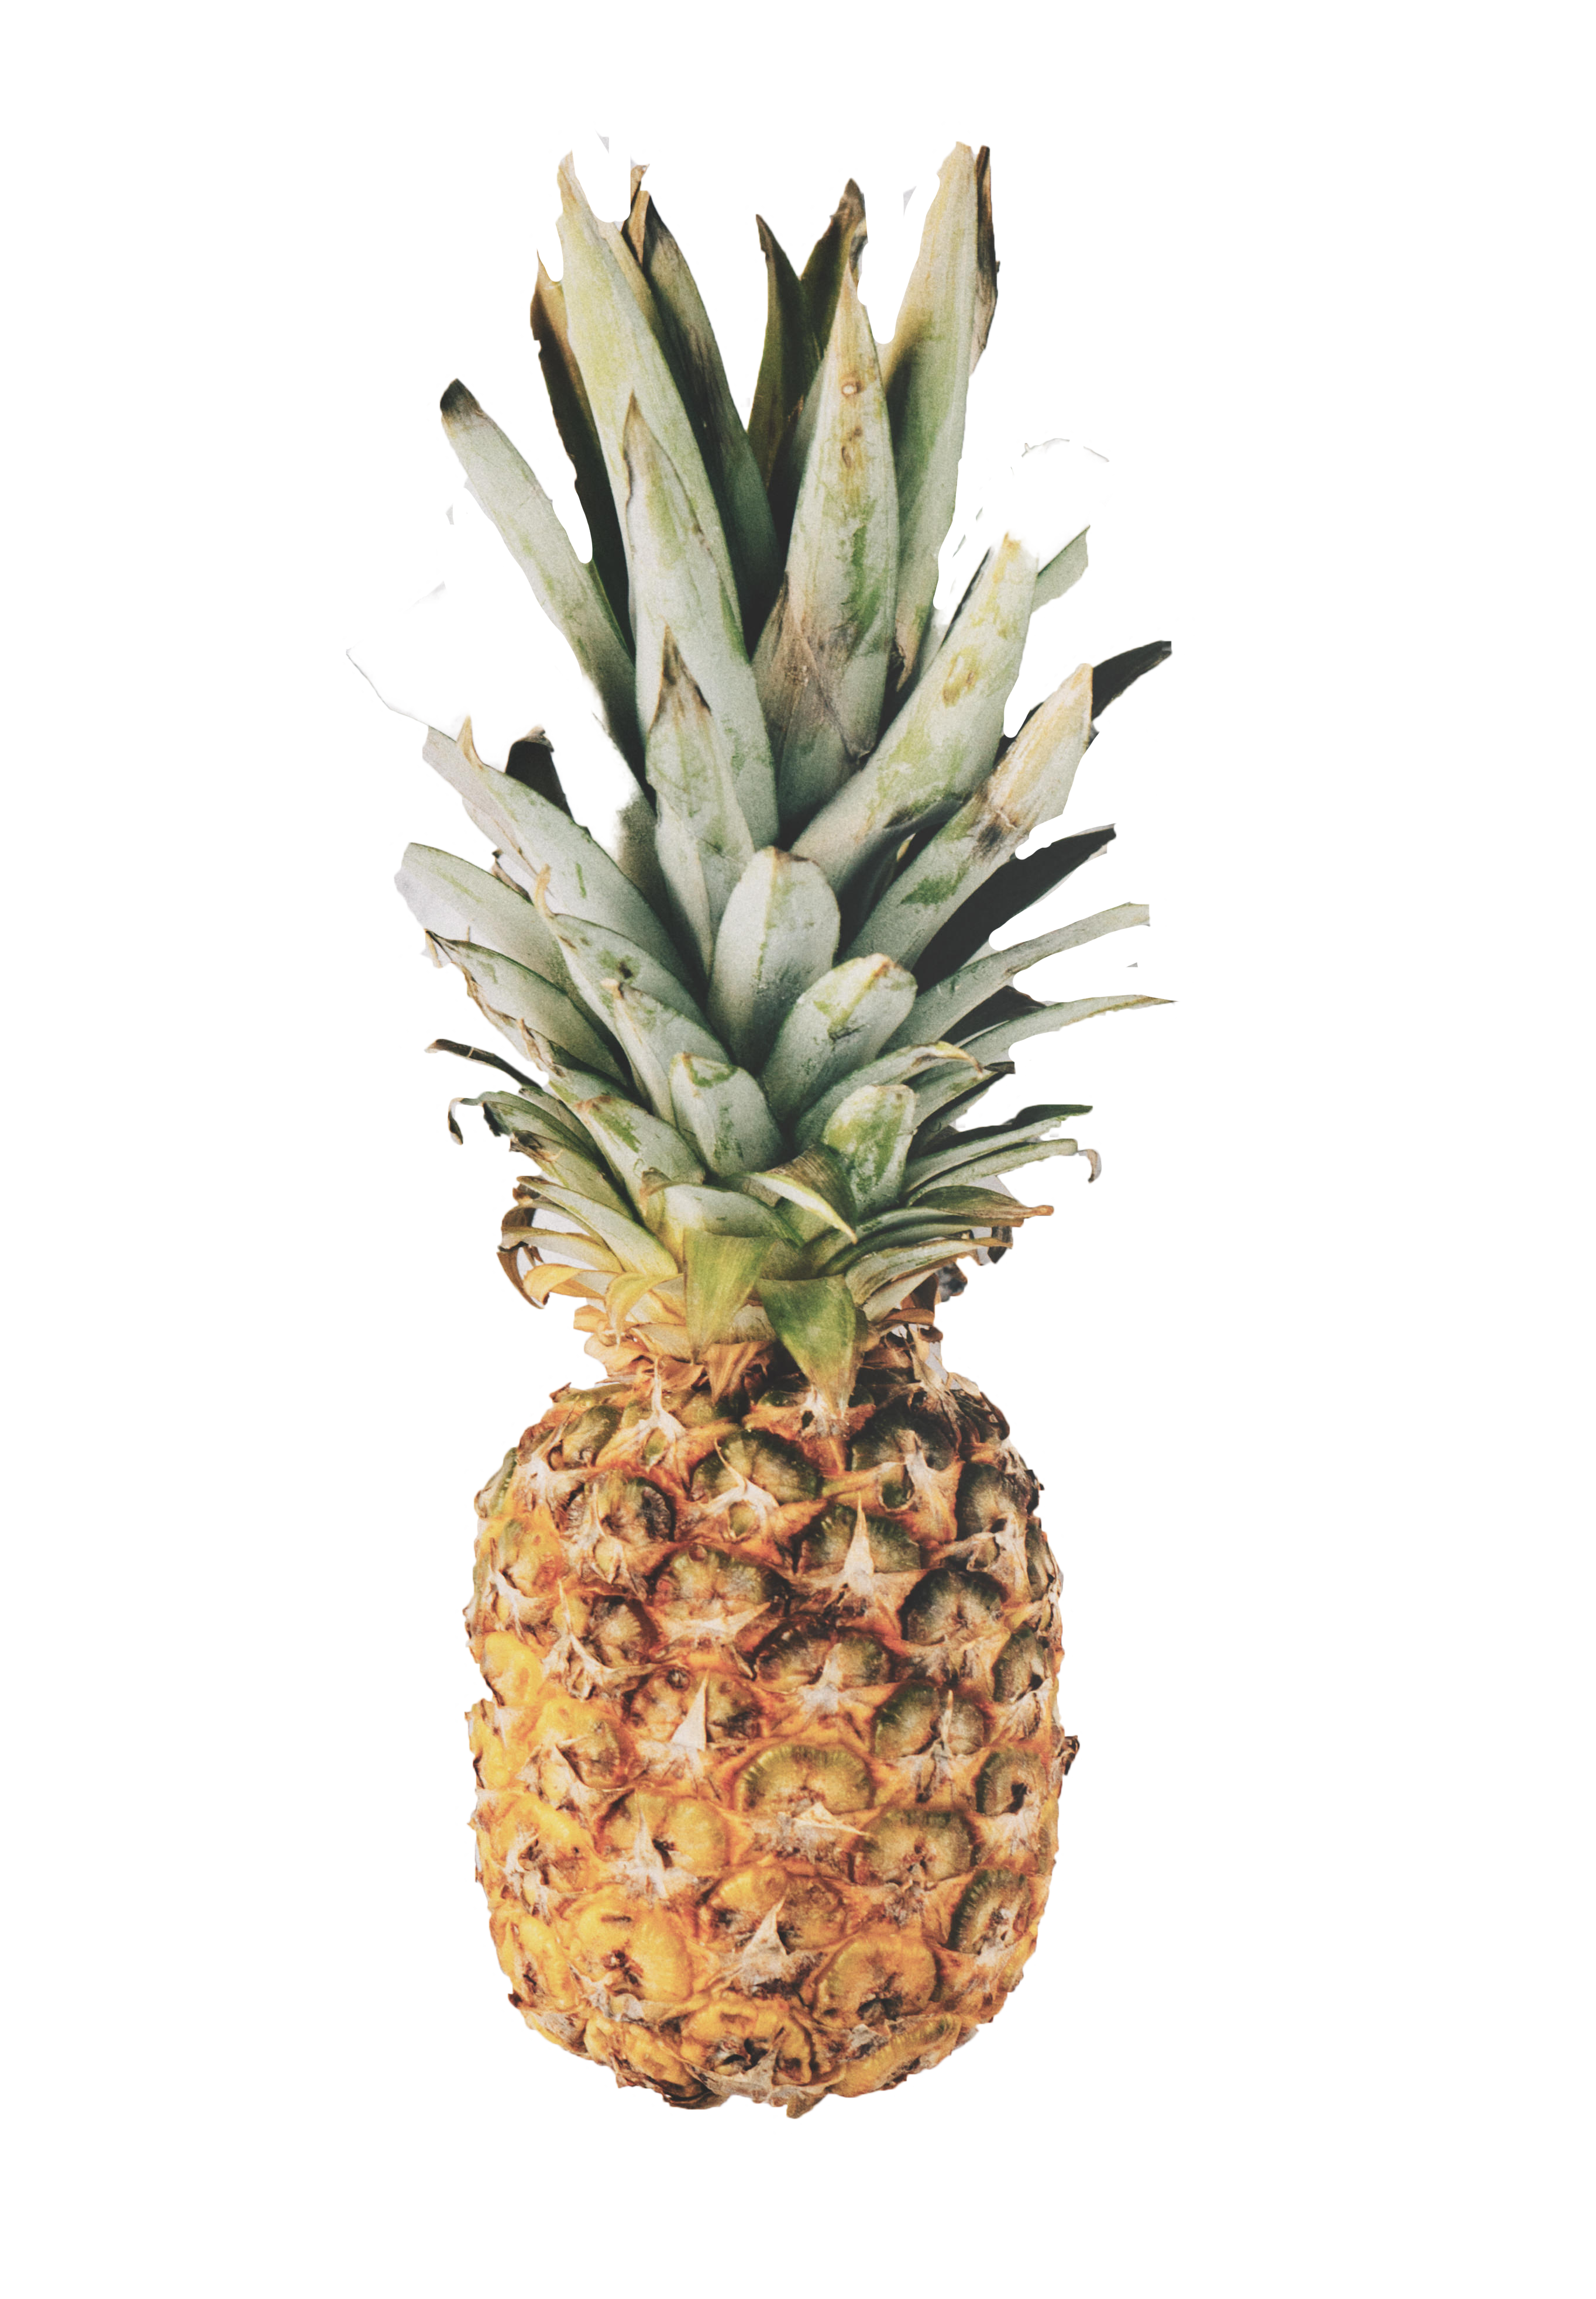 pineapple clipart food